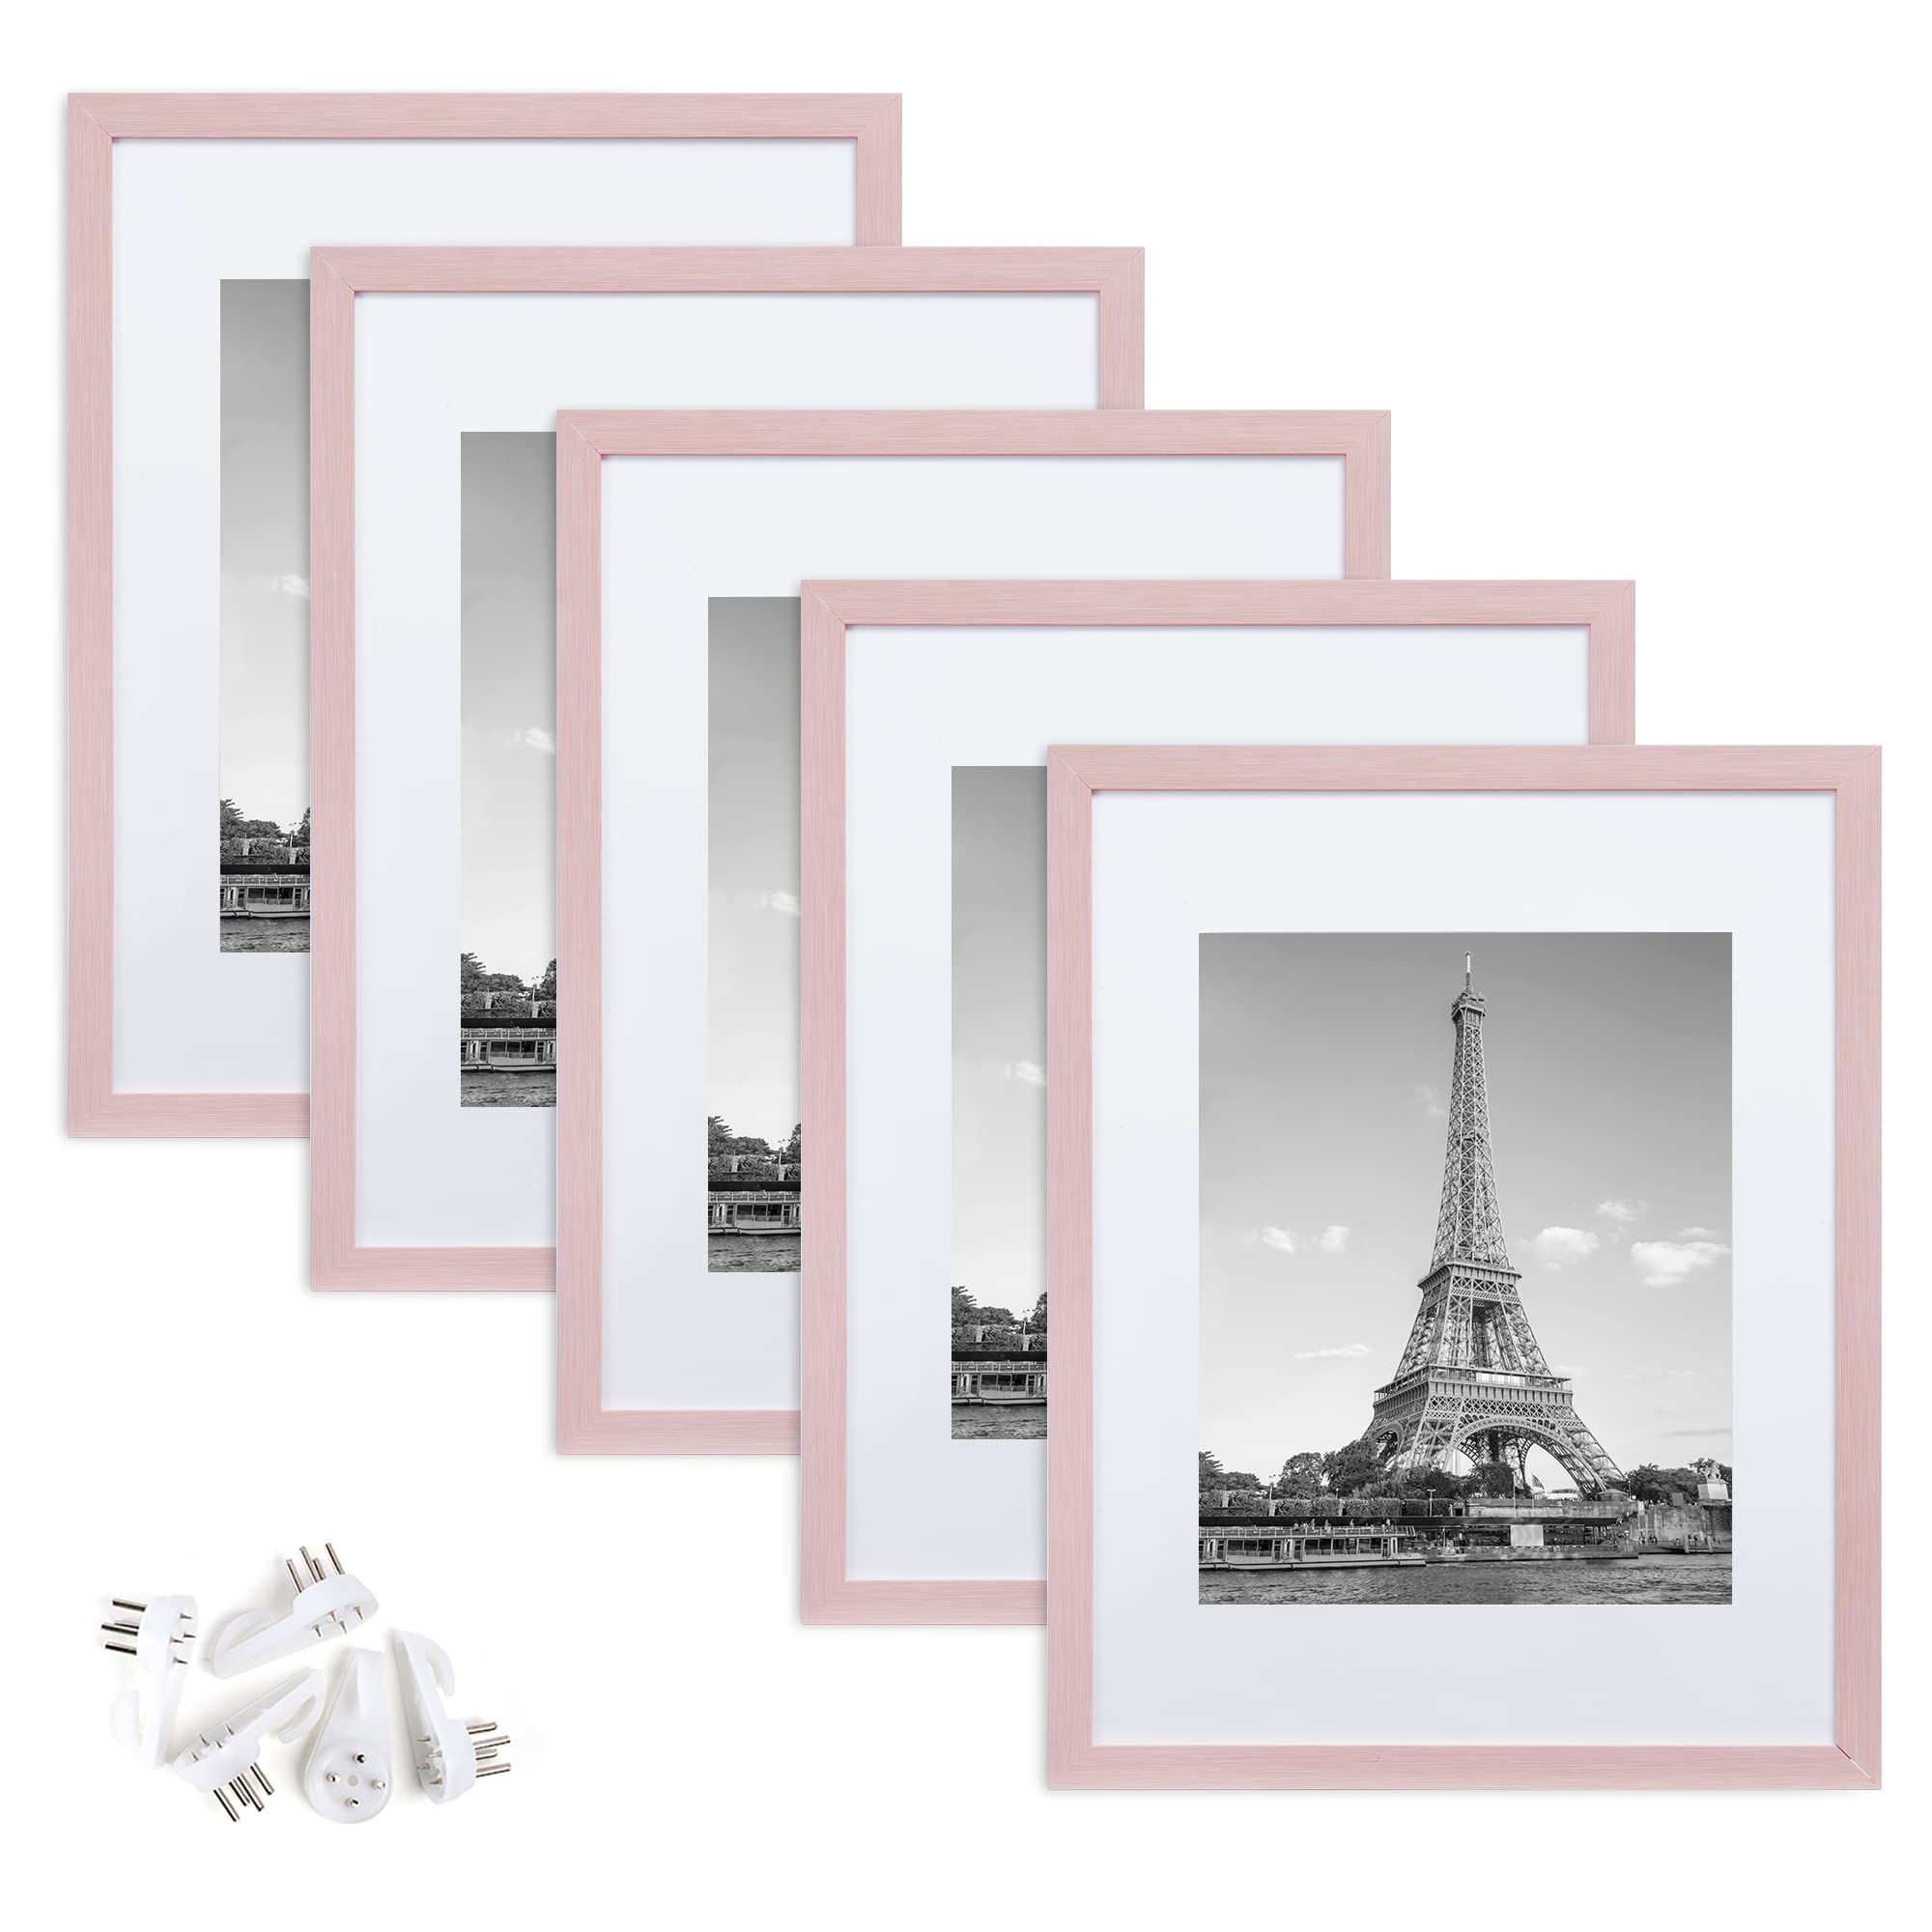  upsimples 11x14 Picture Frame Set of 5, Display